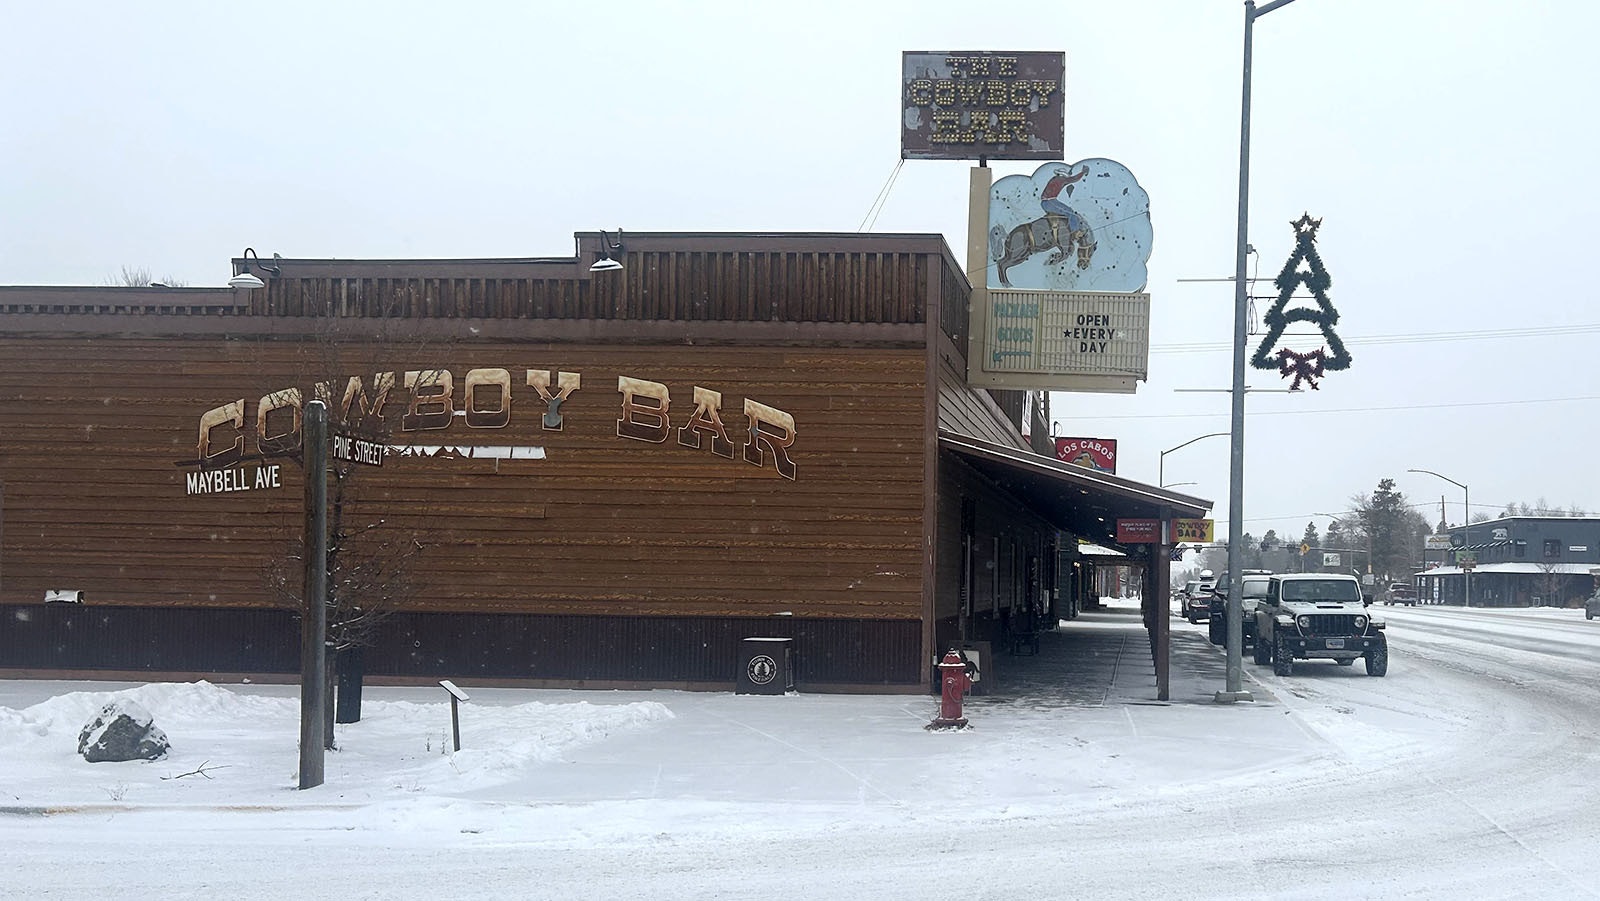 The Cowboy Bar in Pinedale.